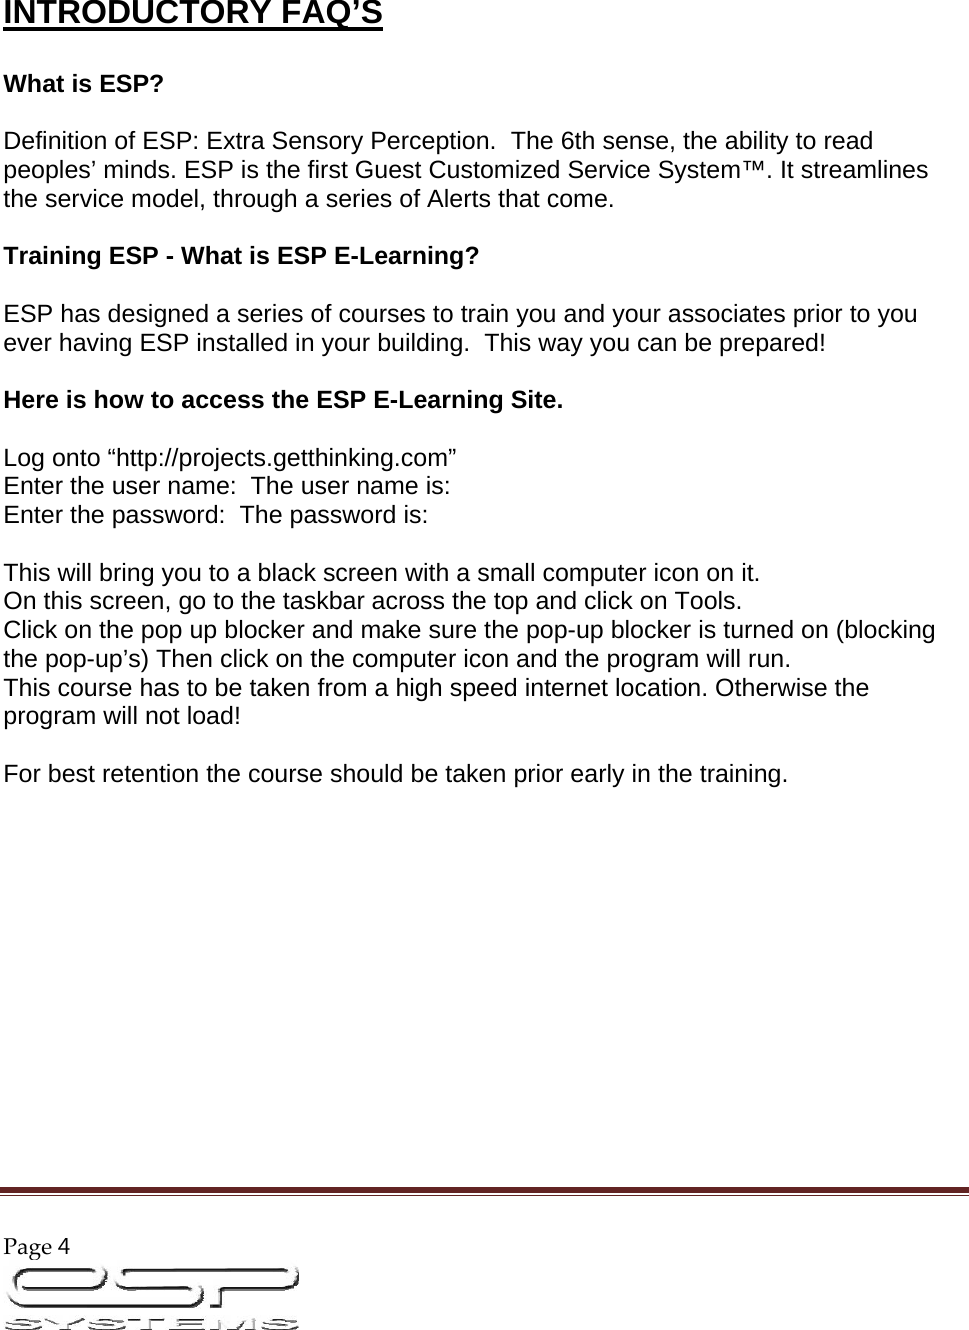 Page4                                                                                                          INTRODUCTORY FAQ’S   What is ESP?   Definition of ESP: Extra Sensory Perception.  The 6th sense, the ability to read peoples’ minds. ESP is the first Guest Customized Service System™. It streamlines the service model, through a series of Alerts that come.   Training ESP - What is ESP E-Learning?   ESP has designed a series of courses to train you and your associates prior to you ever having ESP installed in your building.  This way you can be prepared!    Here is how to access the ESP E-Learning Site.   Log onto “http://projects.getthinking.com” Enter the user name:  The user name is:  Enter the password:  The password is:   This will bring you to a black screen with a small computer icon on it.  On this screen, go to the taskbar across the top and click on Tools.  Click on the pop up blocker and make sure the pop-up blocker is turned on (blocking the pop-up’s) Then click on the computer icon and the program will run.  This course has to be taken from a high speed internet location. Otherwise the program will not load!   For best retention the course should be taken prior early in the training.               